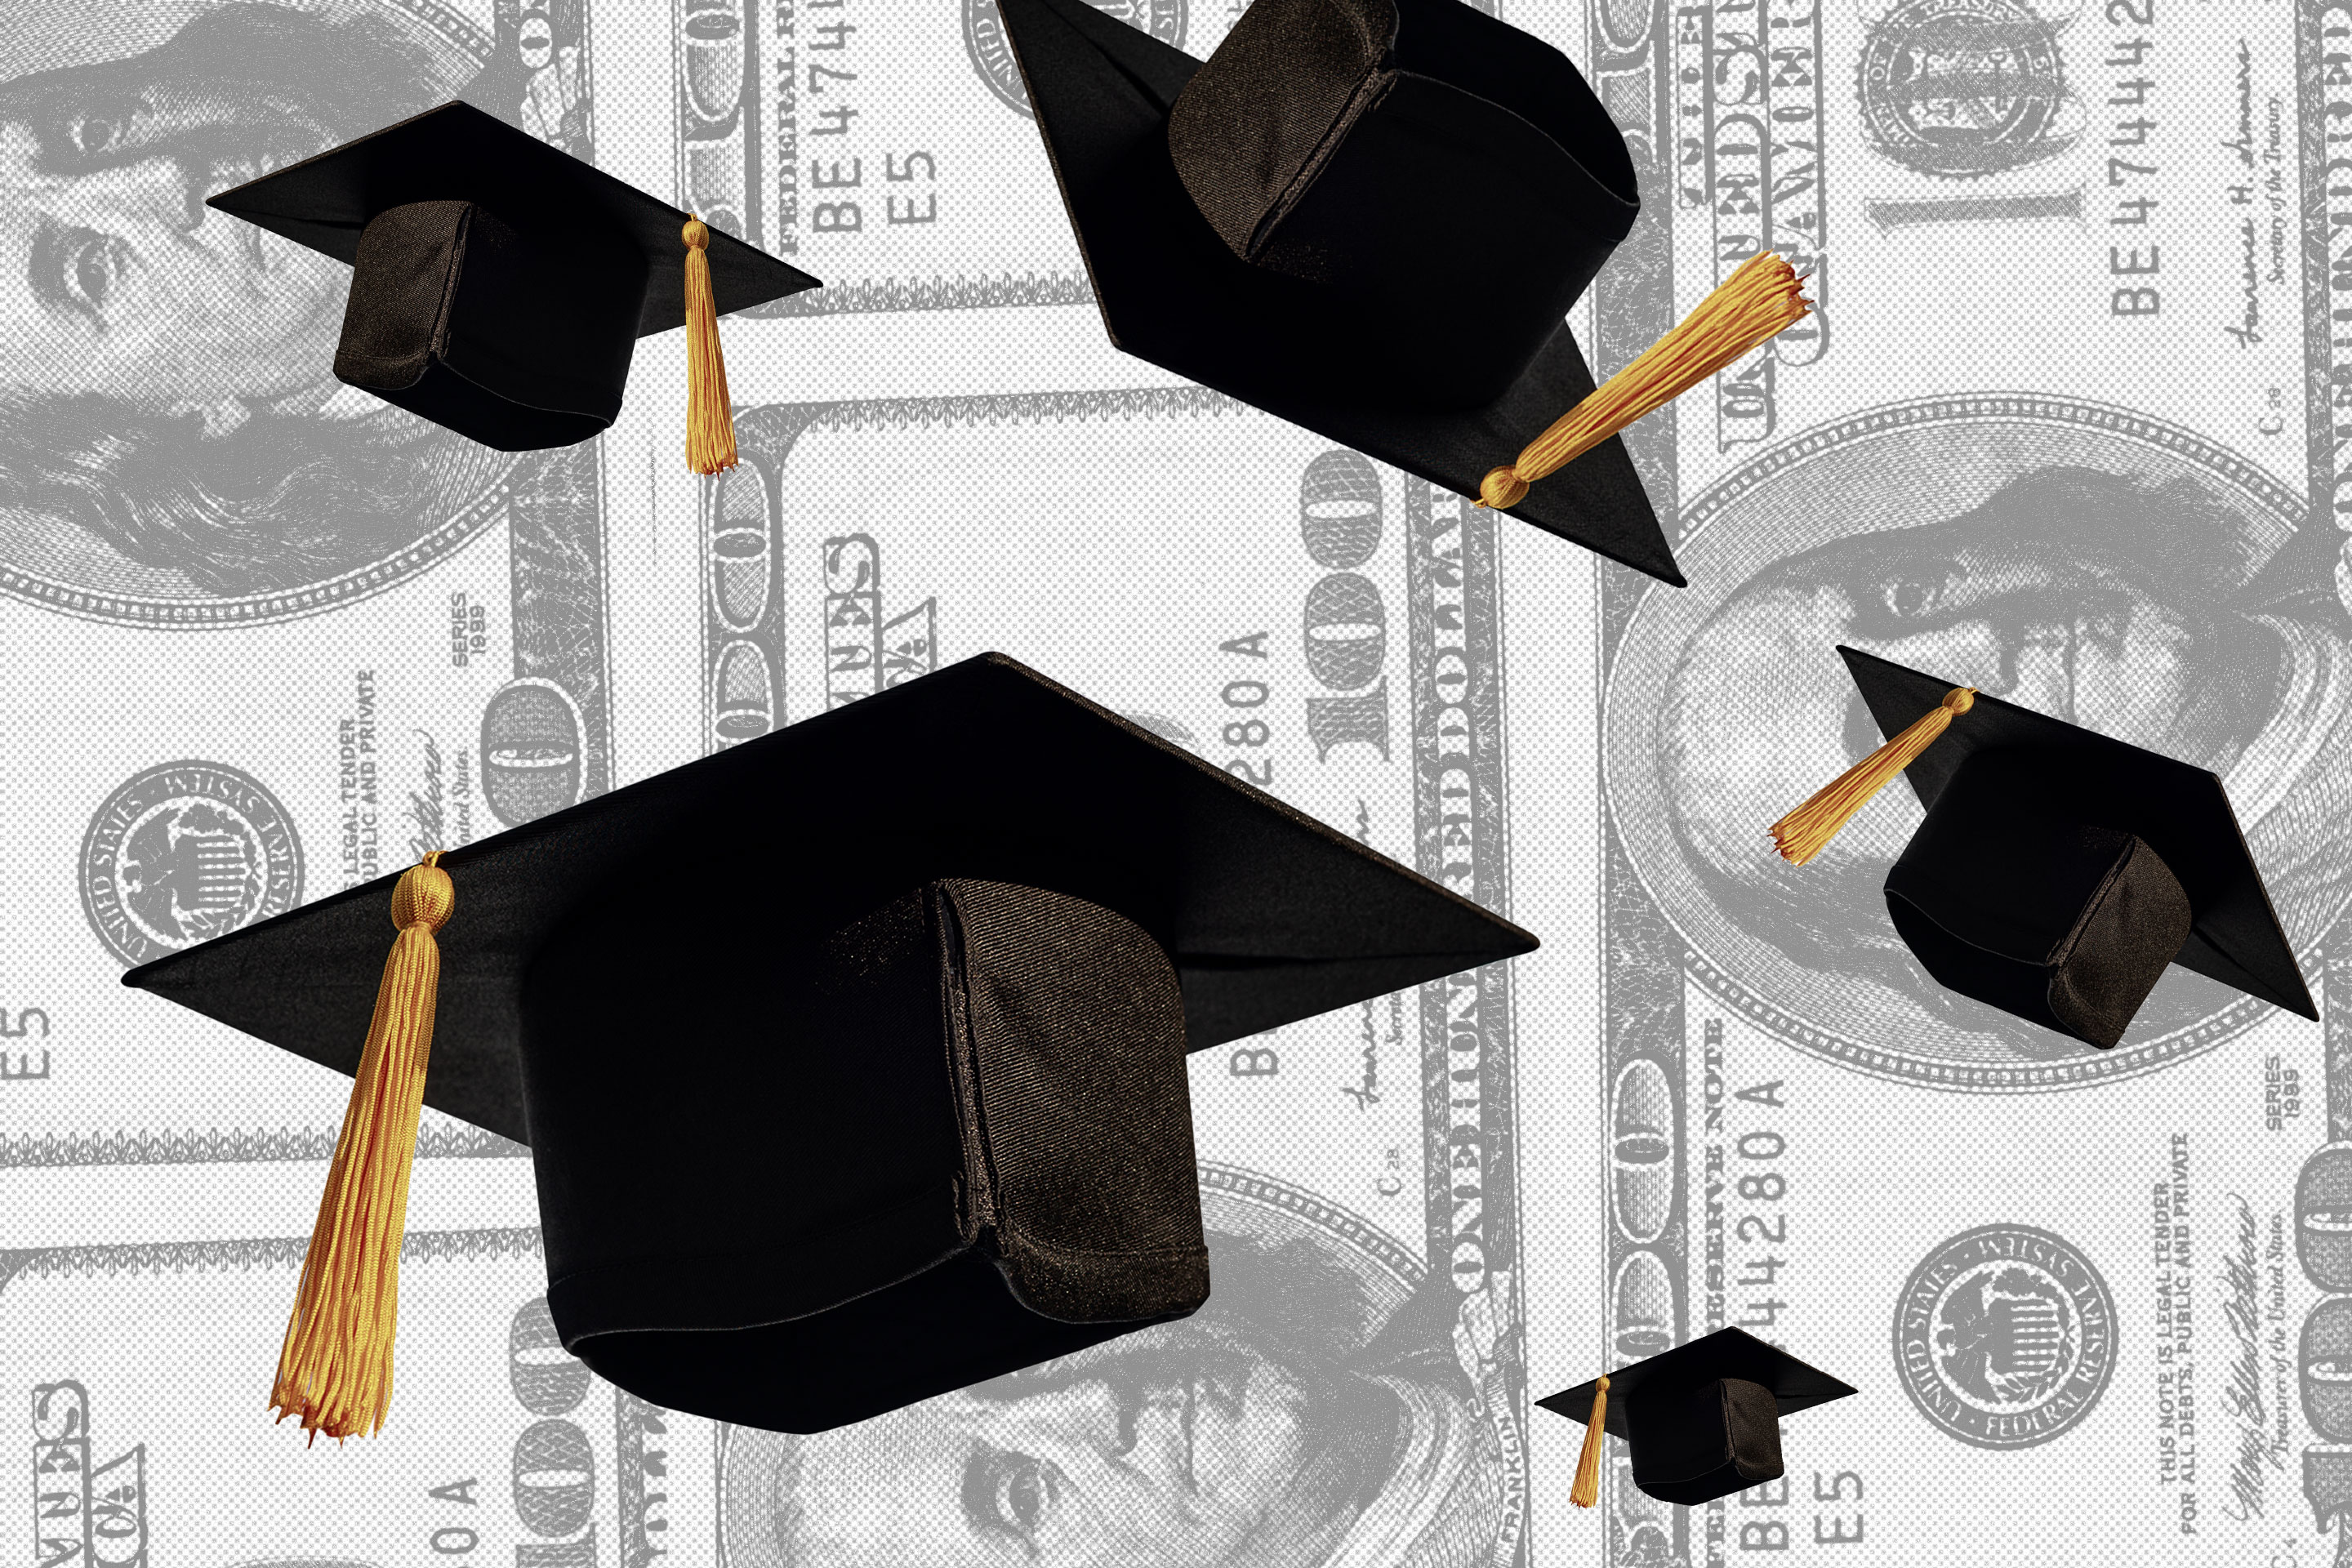 Interest Rates on Federal Student Loans Will Rise Later This Year